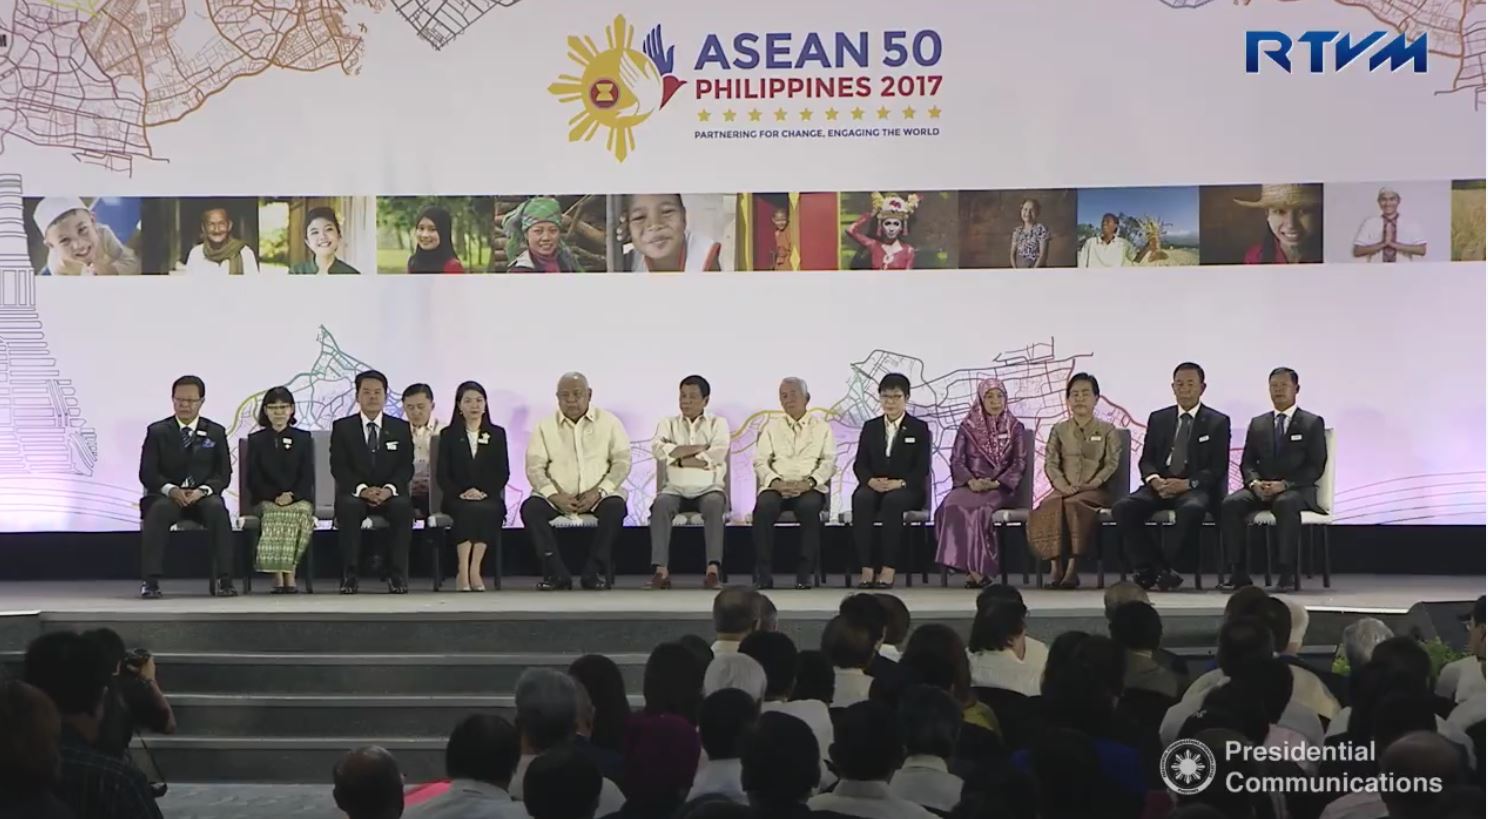 The Philippine chairmanship of the ASEAN is launched in Davao City with President Rodrigo Duterte and the ambassadors of the ASEAN member nations. (Photo grabbed from RTVM video)